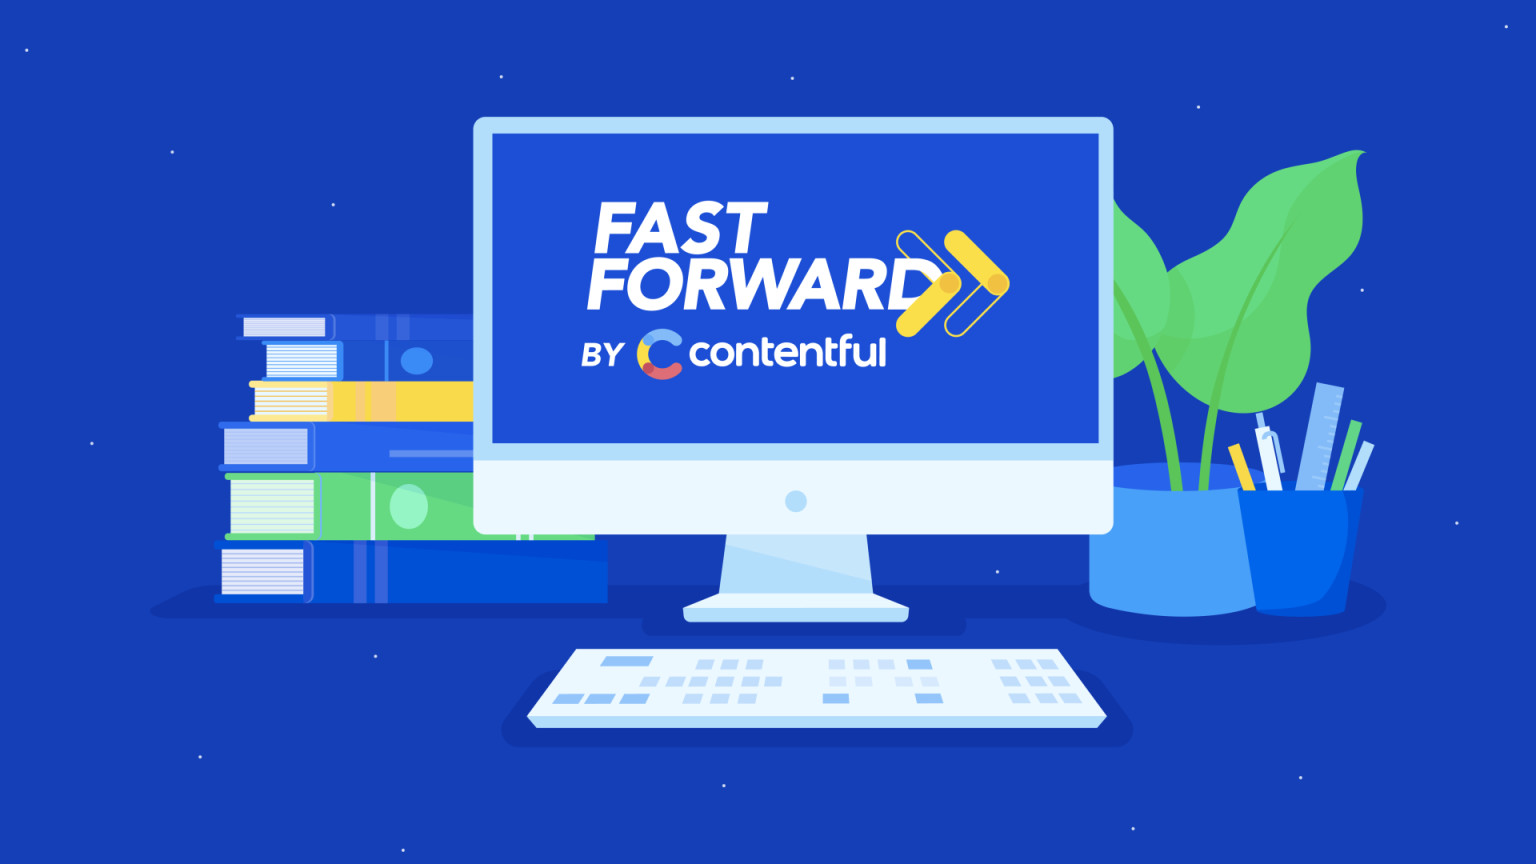 Fast Forward Live 2022 is coming on October 26. Sign up for Contentful's biggest event ever, where we share our vision of the future for digital content.
